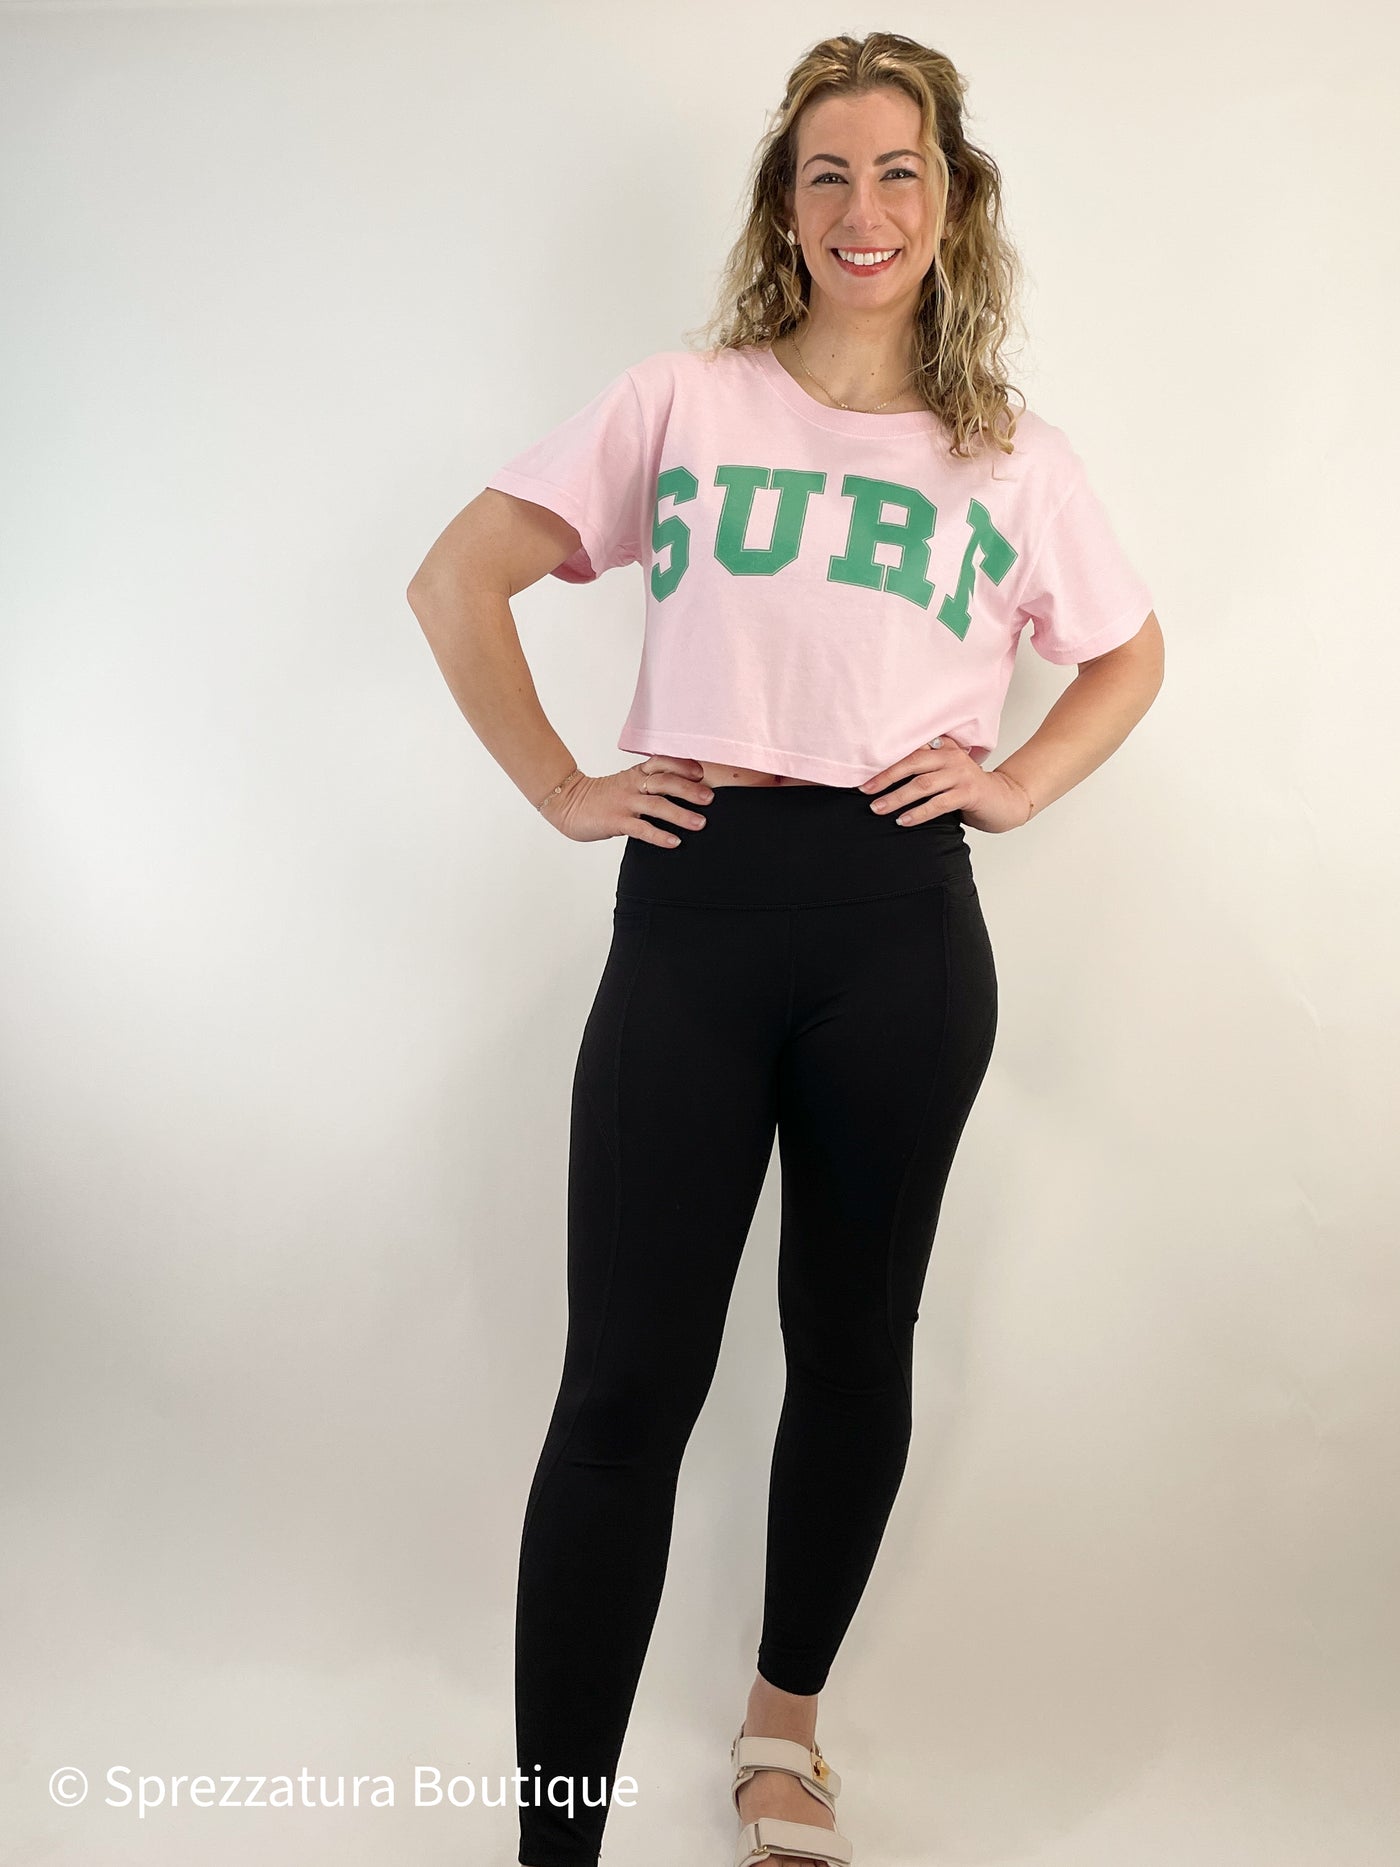 pink cropped shirt that says "surf" in green pastel cute summer coastal beach short sleeve crewneck Modern smart causal female chic effortless outfit womens ladies gift elegant effortless clothing everyday stylish clothes apparel outfits chic winter summer style women’s boutique trendy teacher office cute outfit boutique clothes fashion quality work from home coastal beachy lounge athleisure gift for her casual everyday 